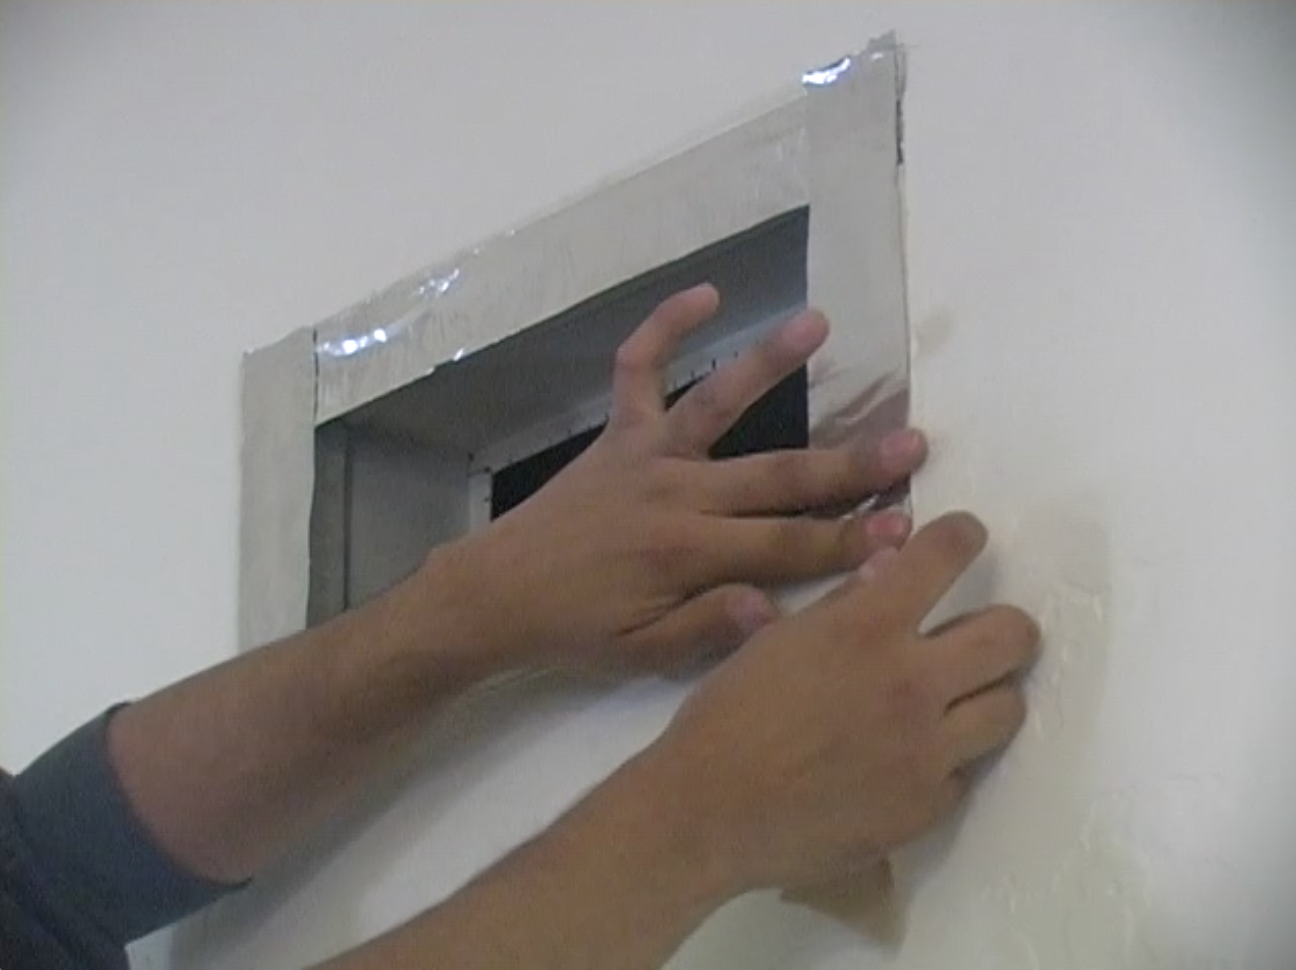 Sealing gaps between the air ducts and the drywall. This prevents any dust or insulation from inserting the home when we turn on our HEPA filtration vacuum.